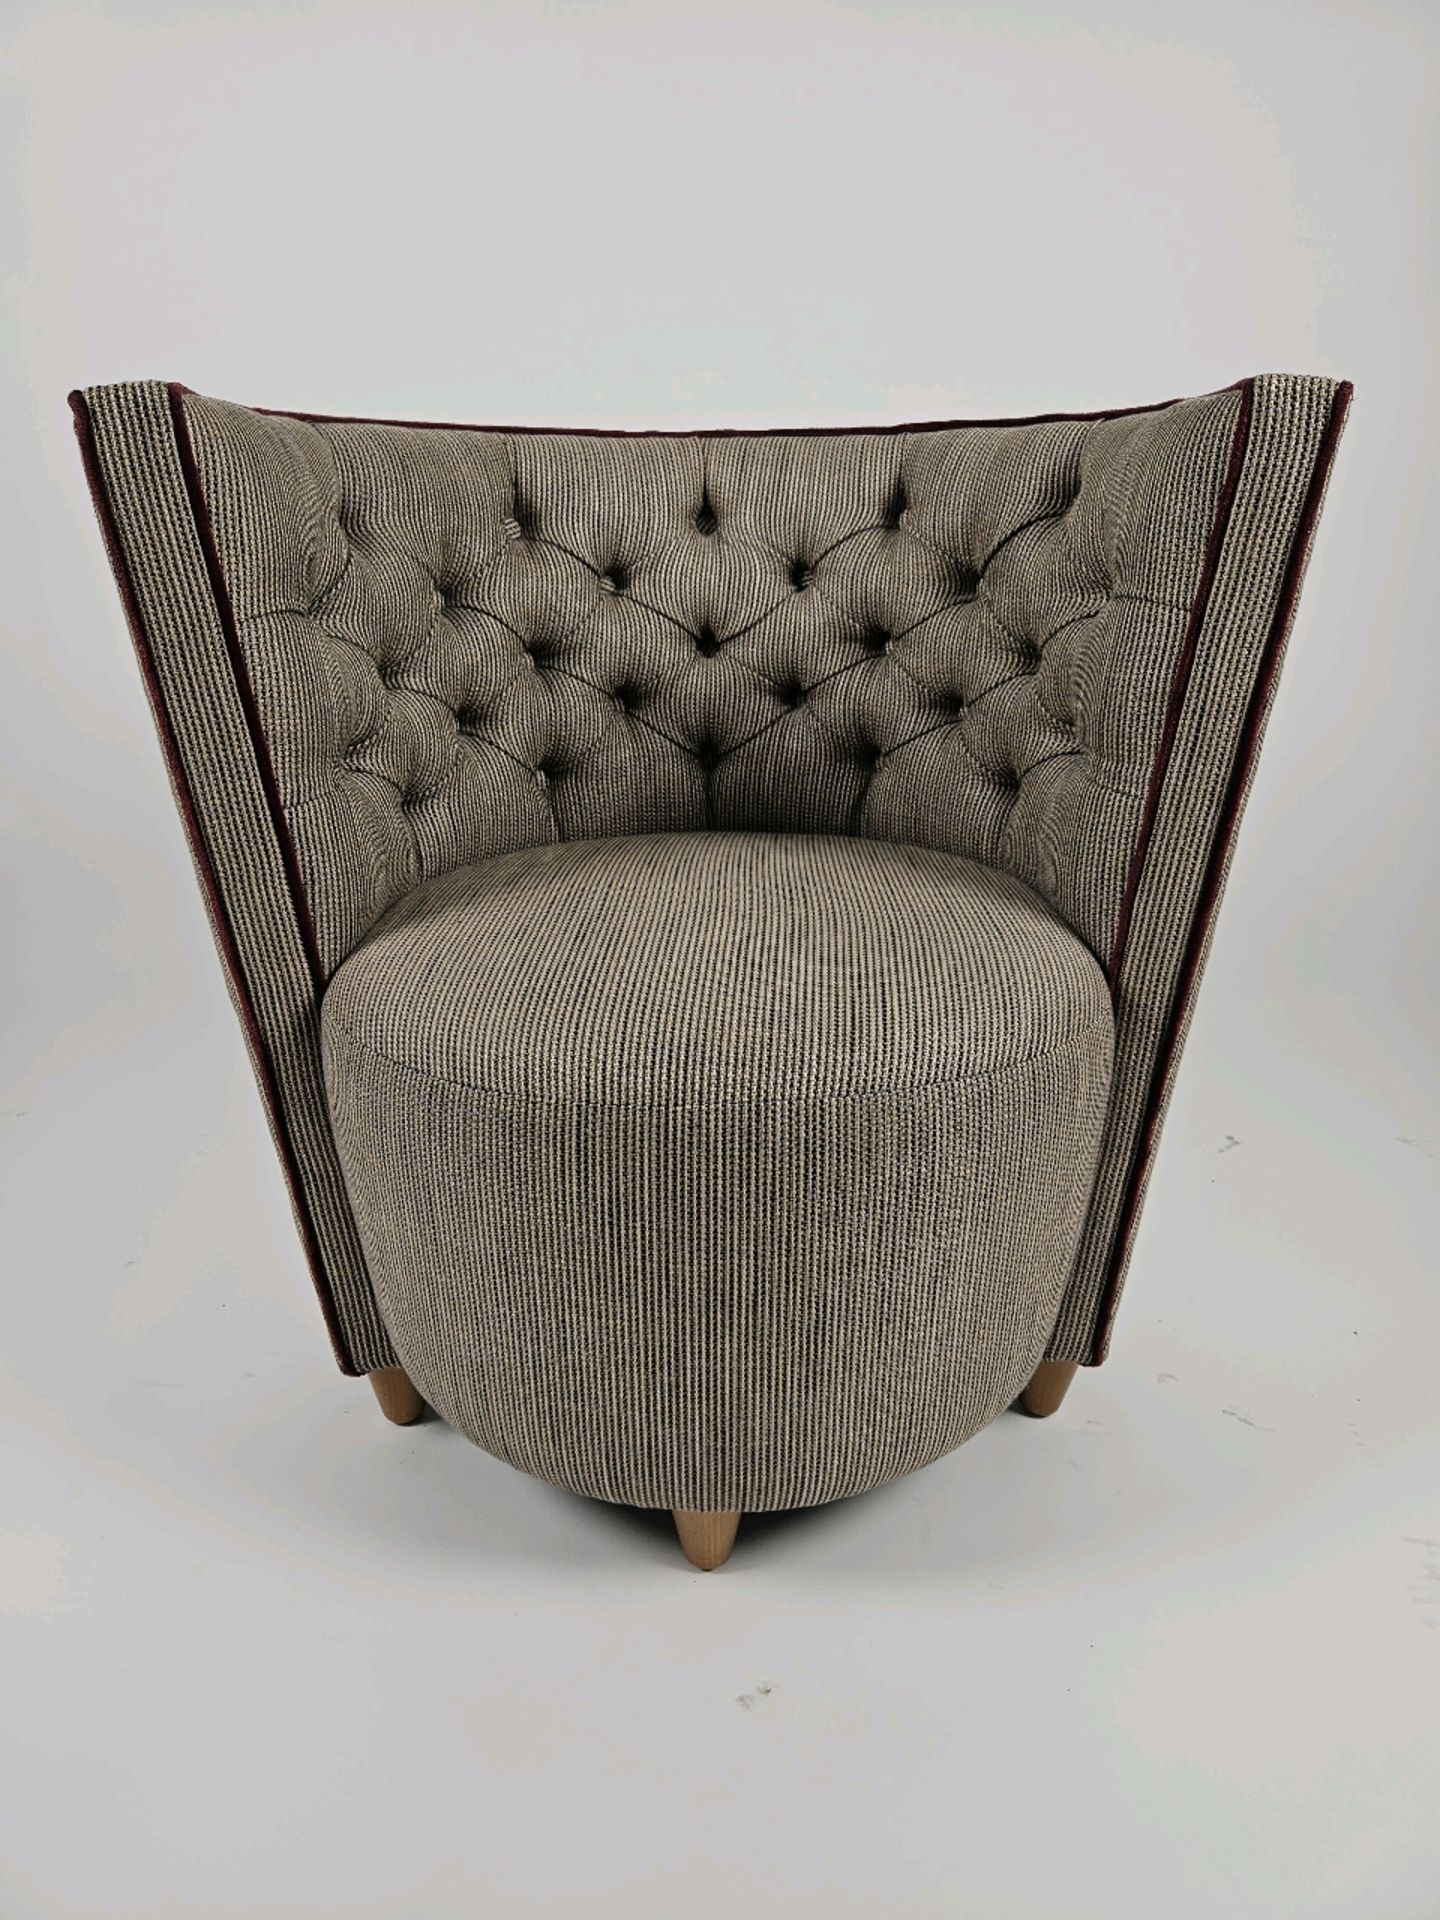 Bespoke Deco Tub Chair by David Linley Made for Claridges - Image 2 of 2